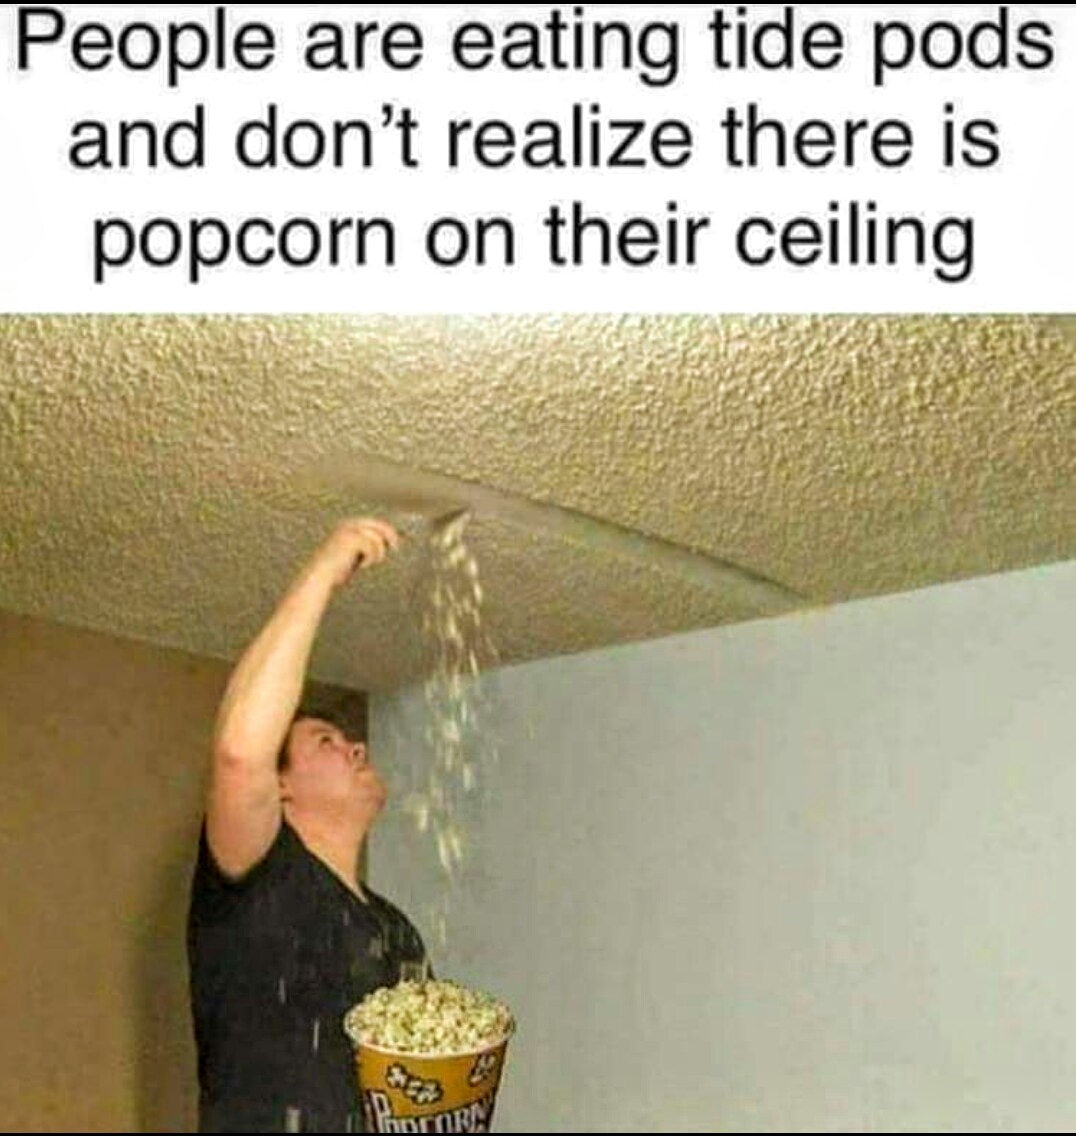 asbestos meme - People are eating tide pods and don't realize there is popcorn on their ceiling